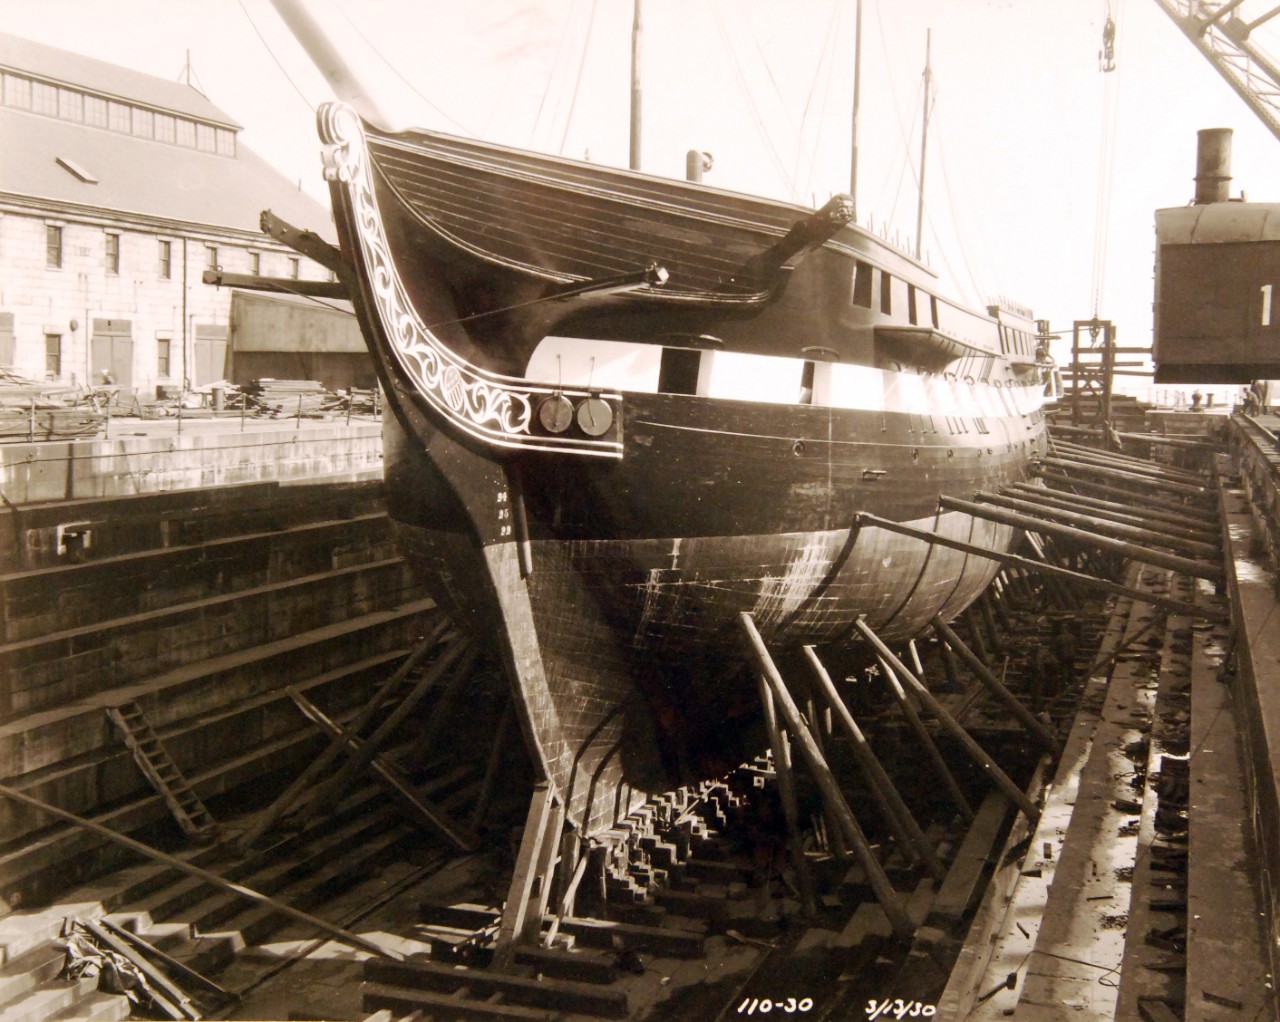 80-G-424971:  USS Constitution, 1930.  Constitution being restored at Boston Navy Yard, Massachusetts.   Shown:  Port side.      Photograph March 1930.   Official U.S. Navy Photograph, now in the collections of the National Archives.   (2017/08/01).  